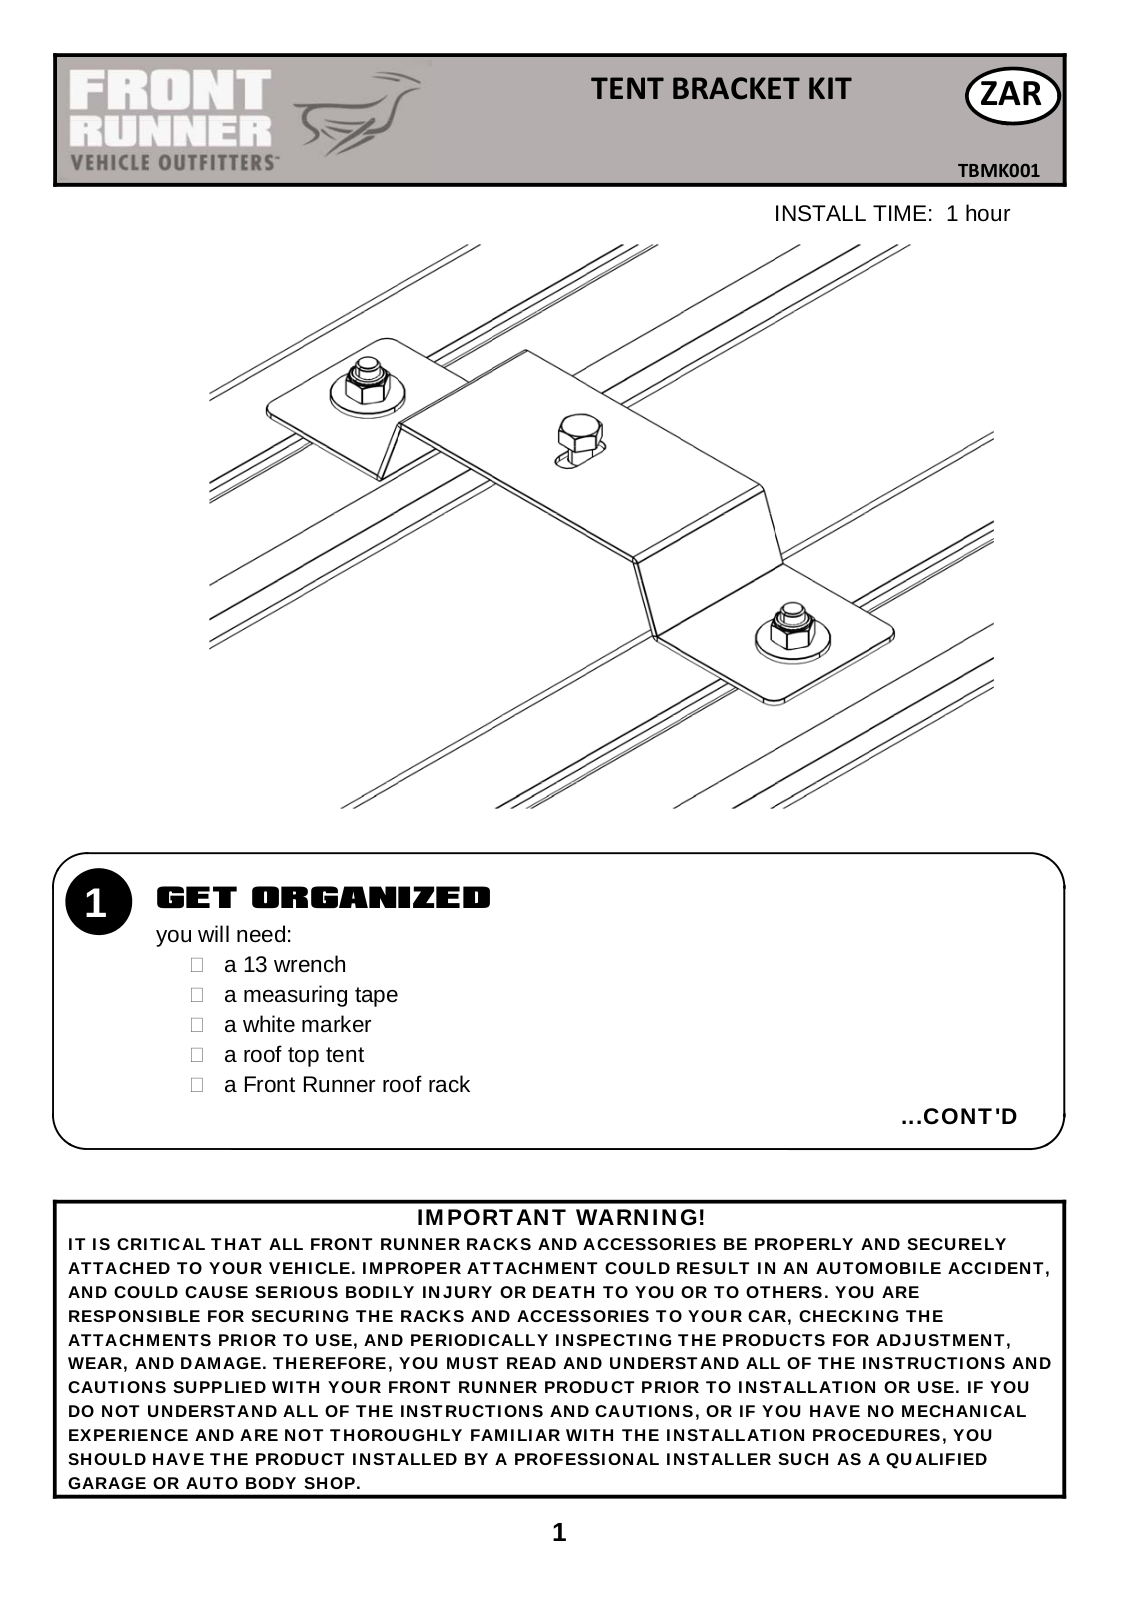 Installation instructions for TBMK001